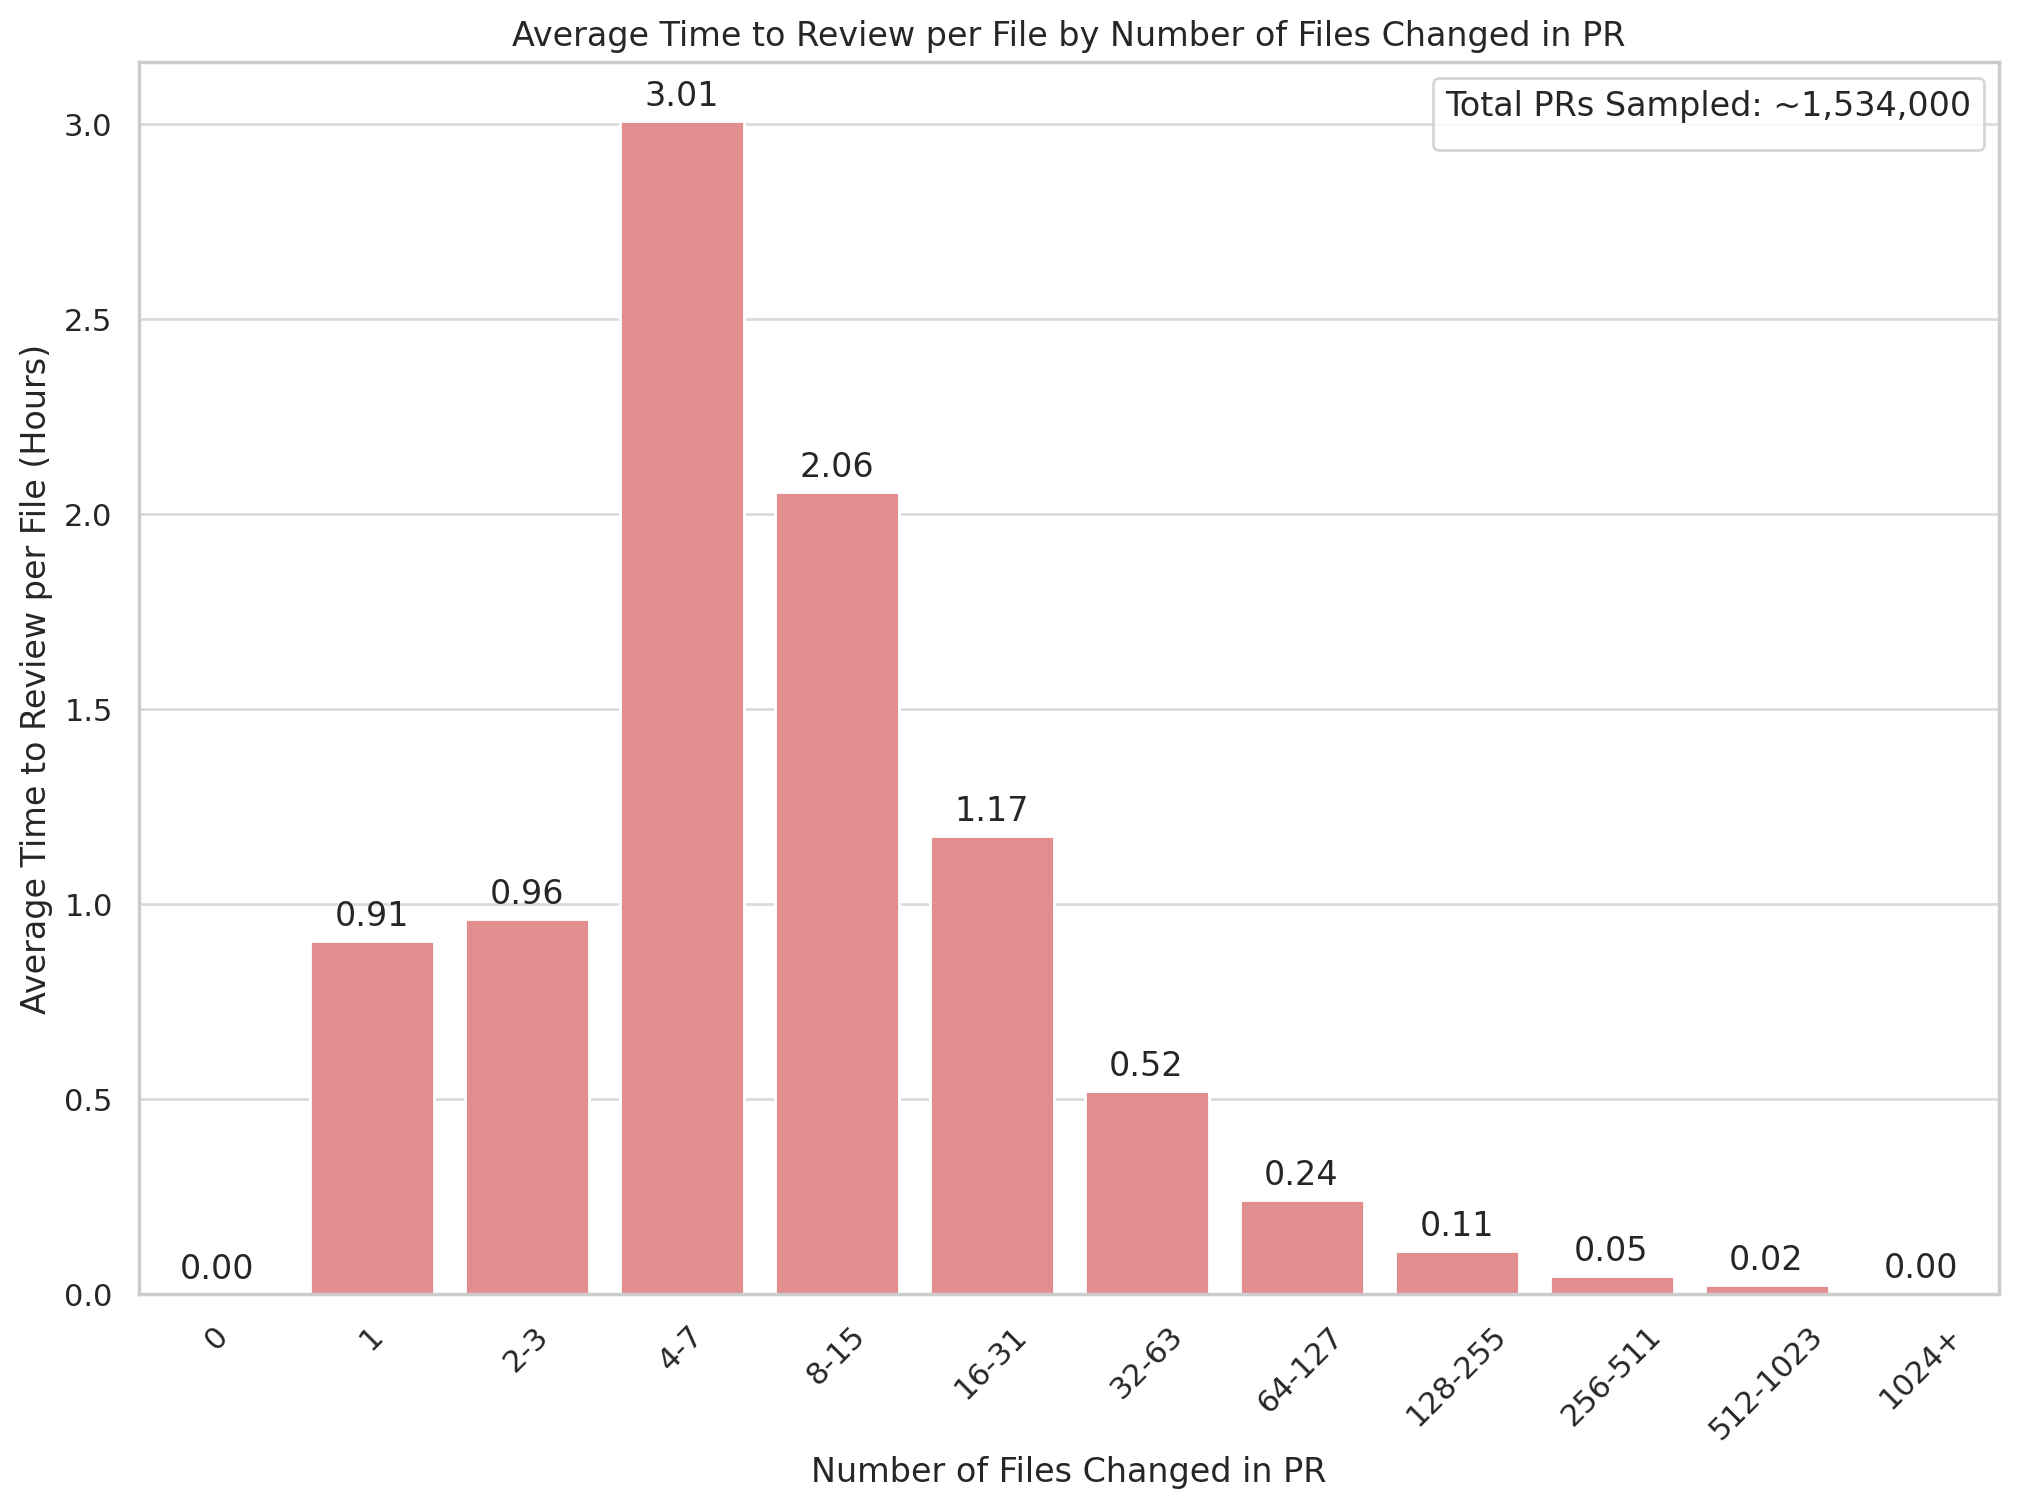 graph depicting average time to review per file by number of files changed in PR